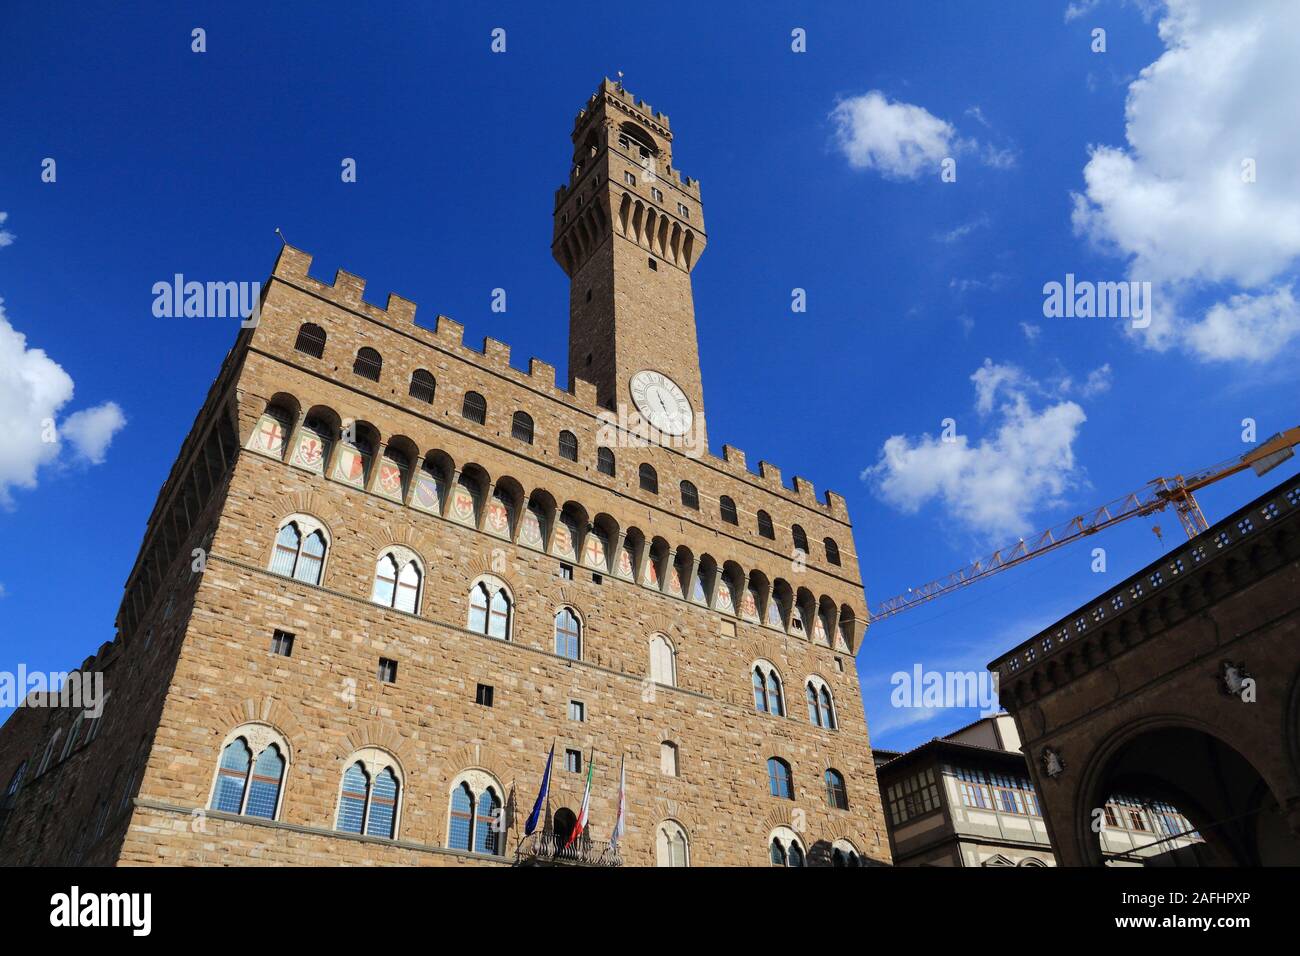 Palazzo Vecchio in Florence. Old town romanesque architecture in Tuscany, Italy. Stock Photo